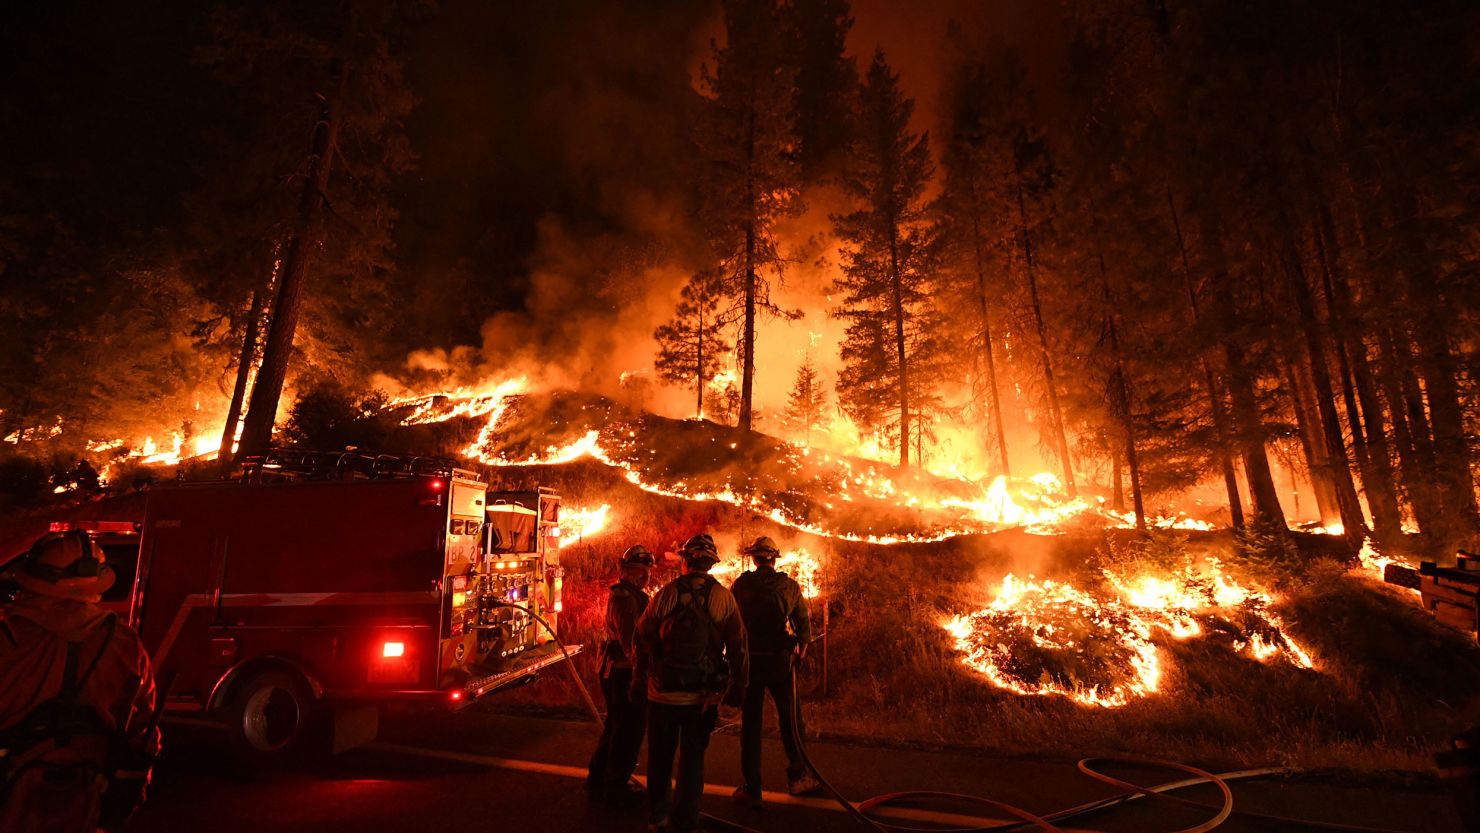 More than a third of the area charred by wildfires in Western